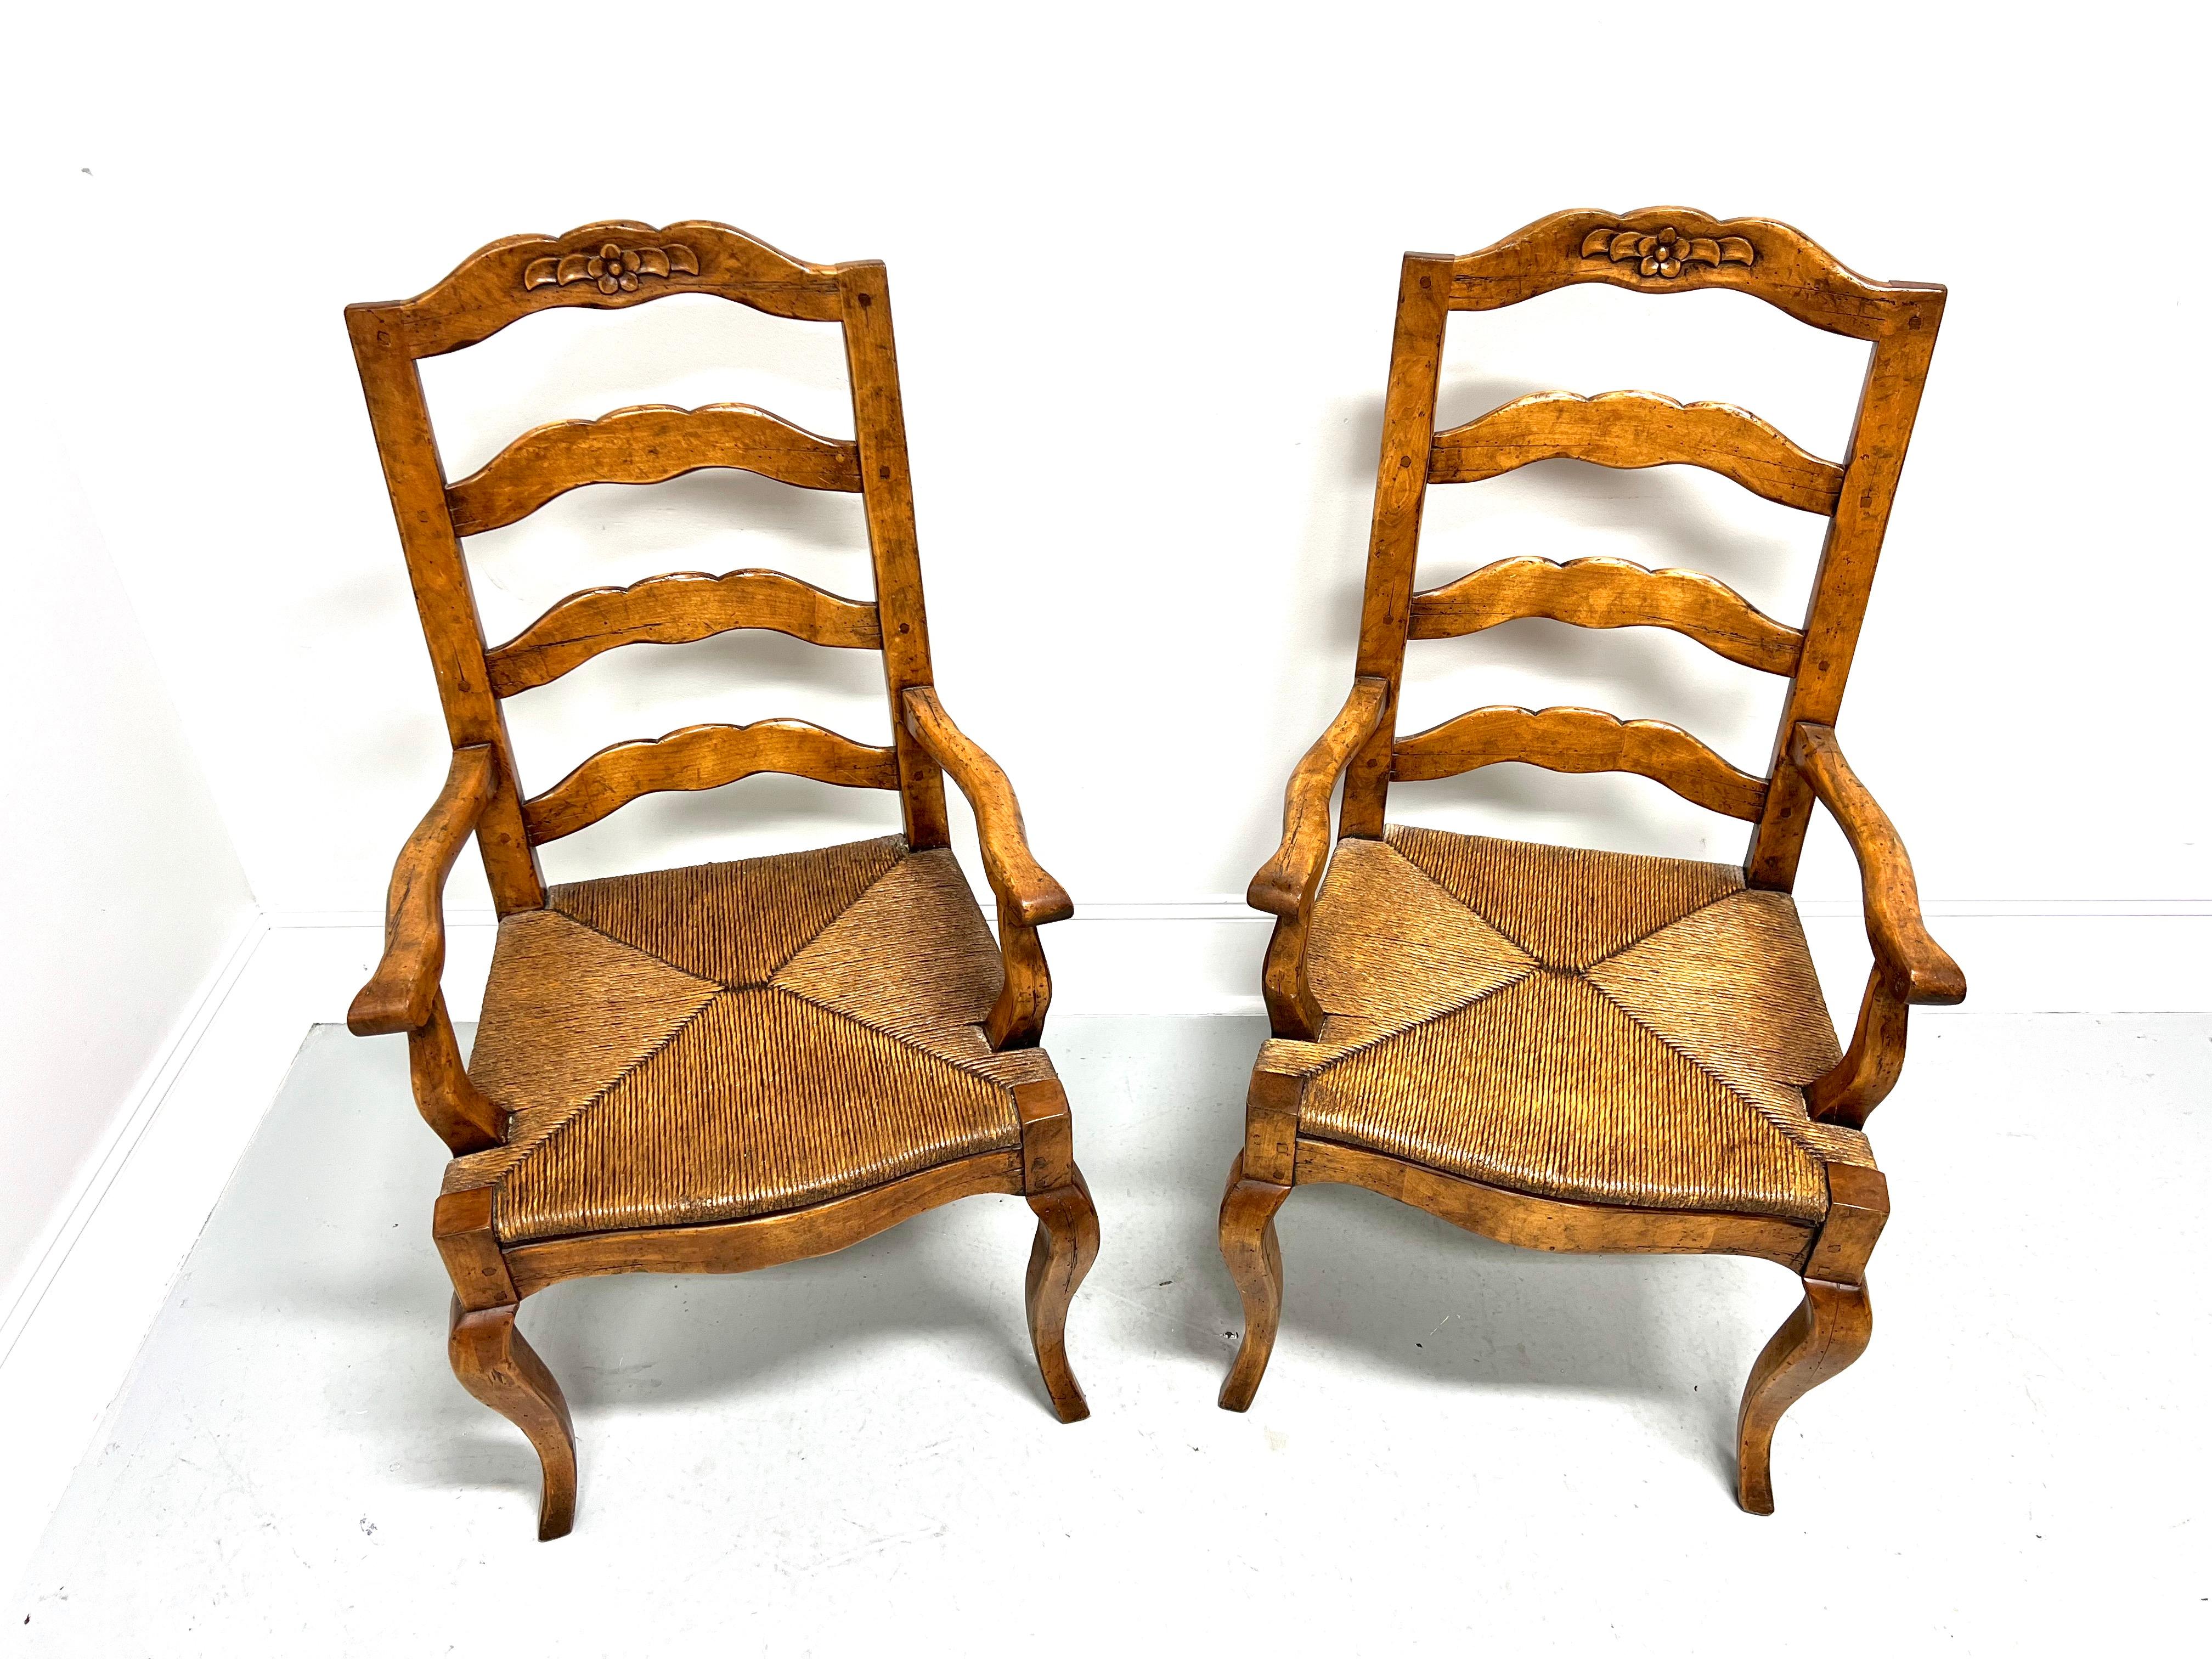 A pair of French Country style dining armchairs, unbranded. Solid nutwood with a distressed finish, ladder back design, decoratively carved crest rail, slightly curved arms with curved supports, rush seats, carved apron, and curved legs. Made in the